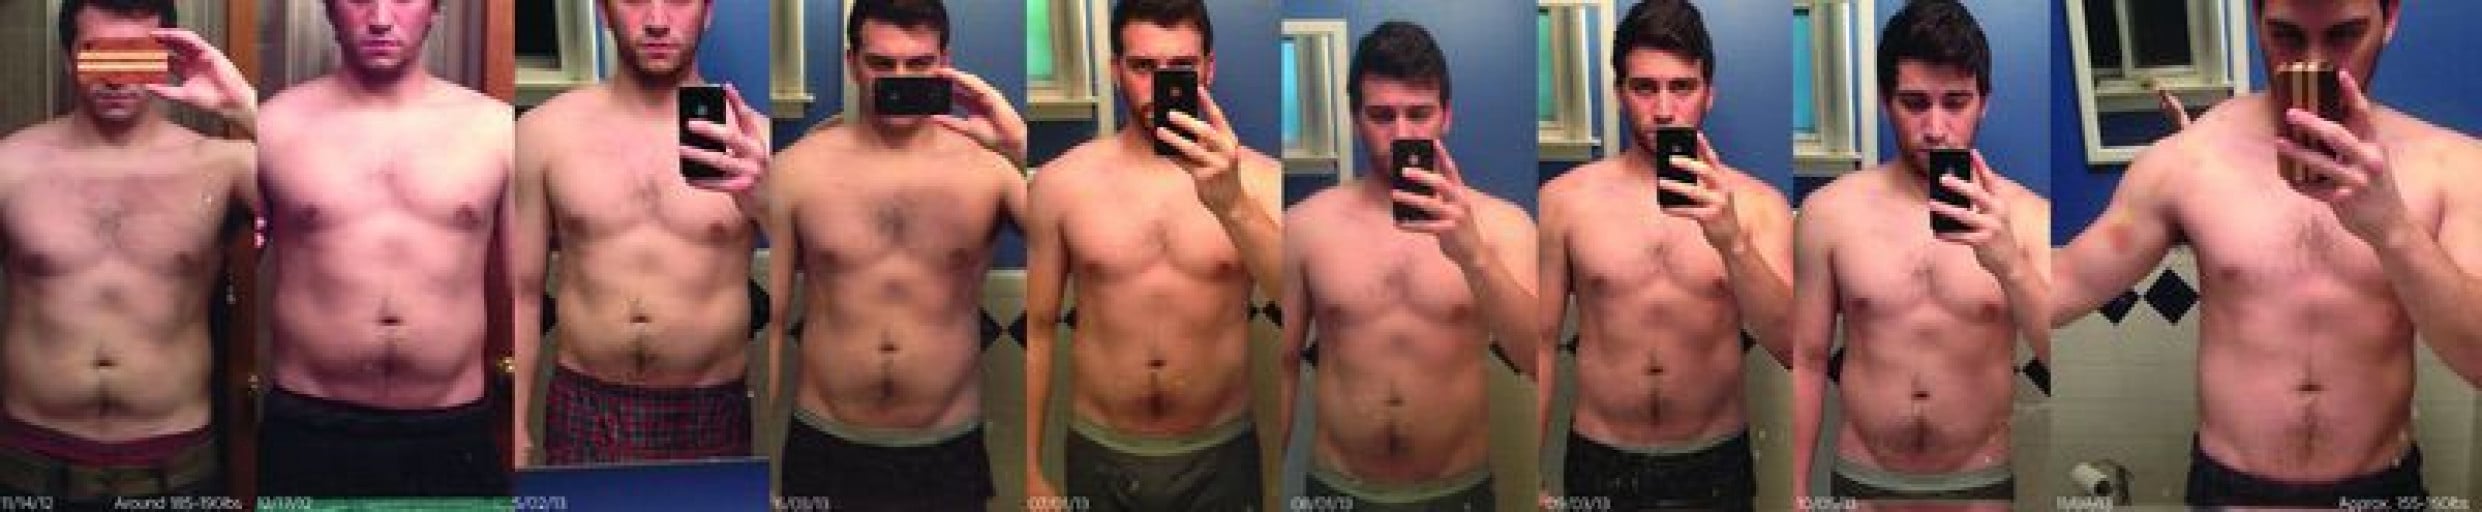 A progress pic of a 5'7" man showing a fat loss from 190 pounds to 160 pounds. A respectable loss of 30 pounds.